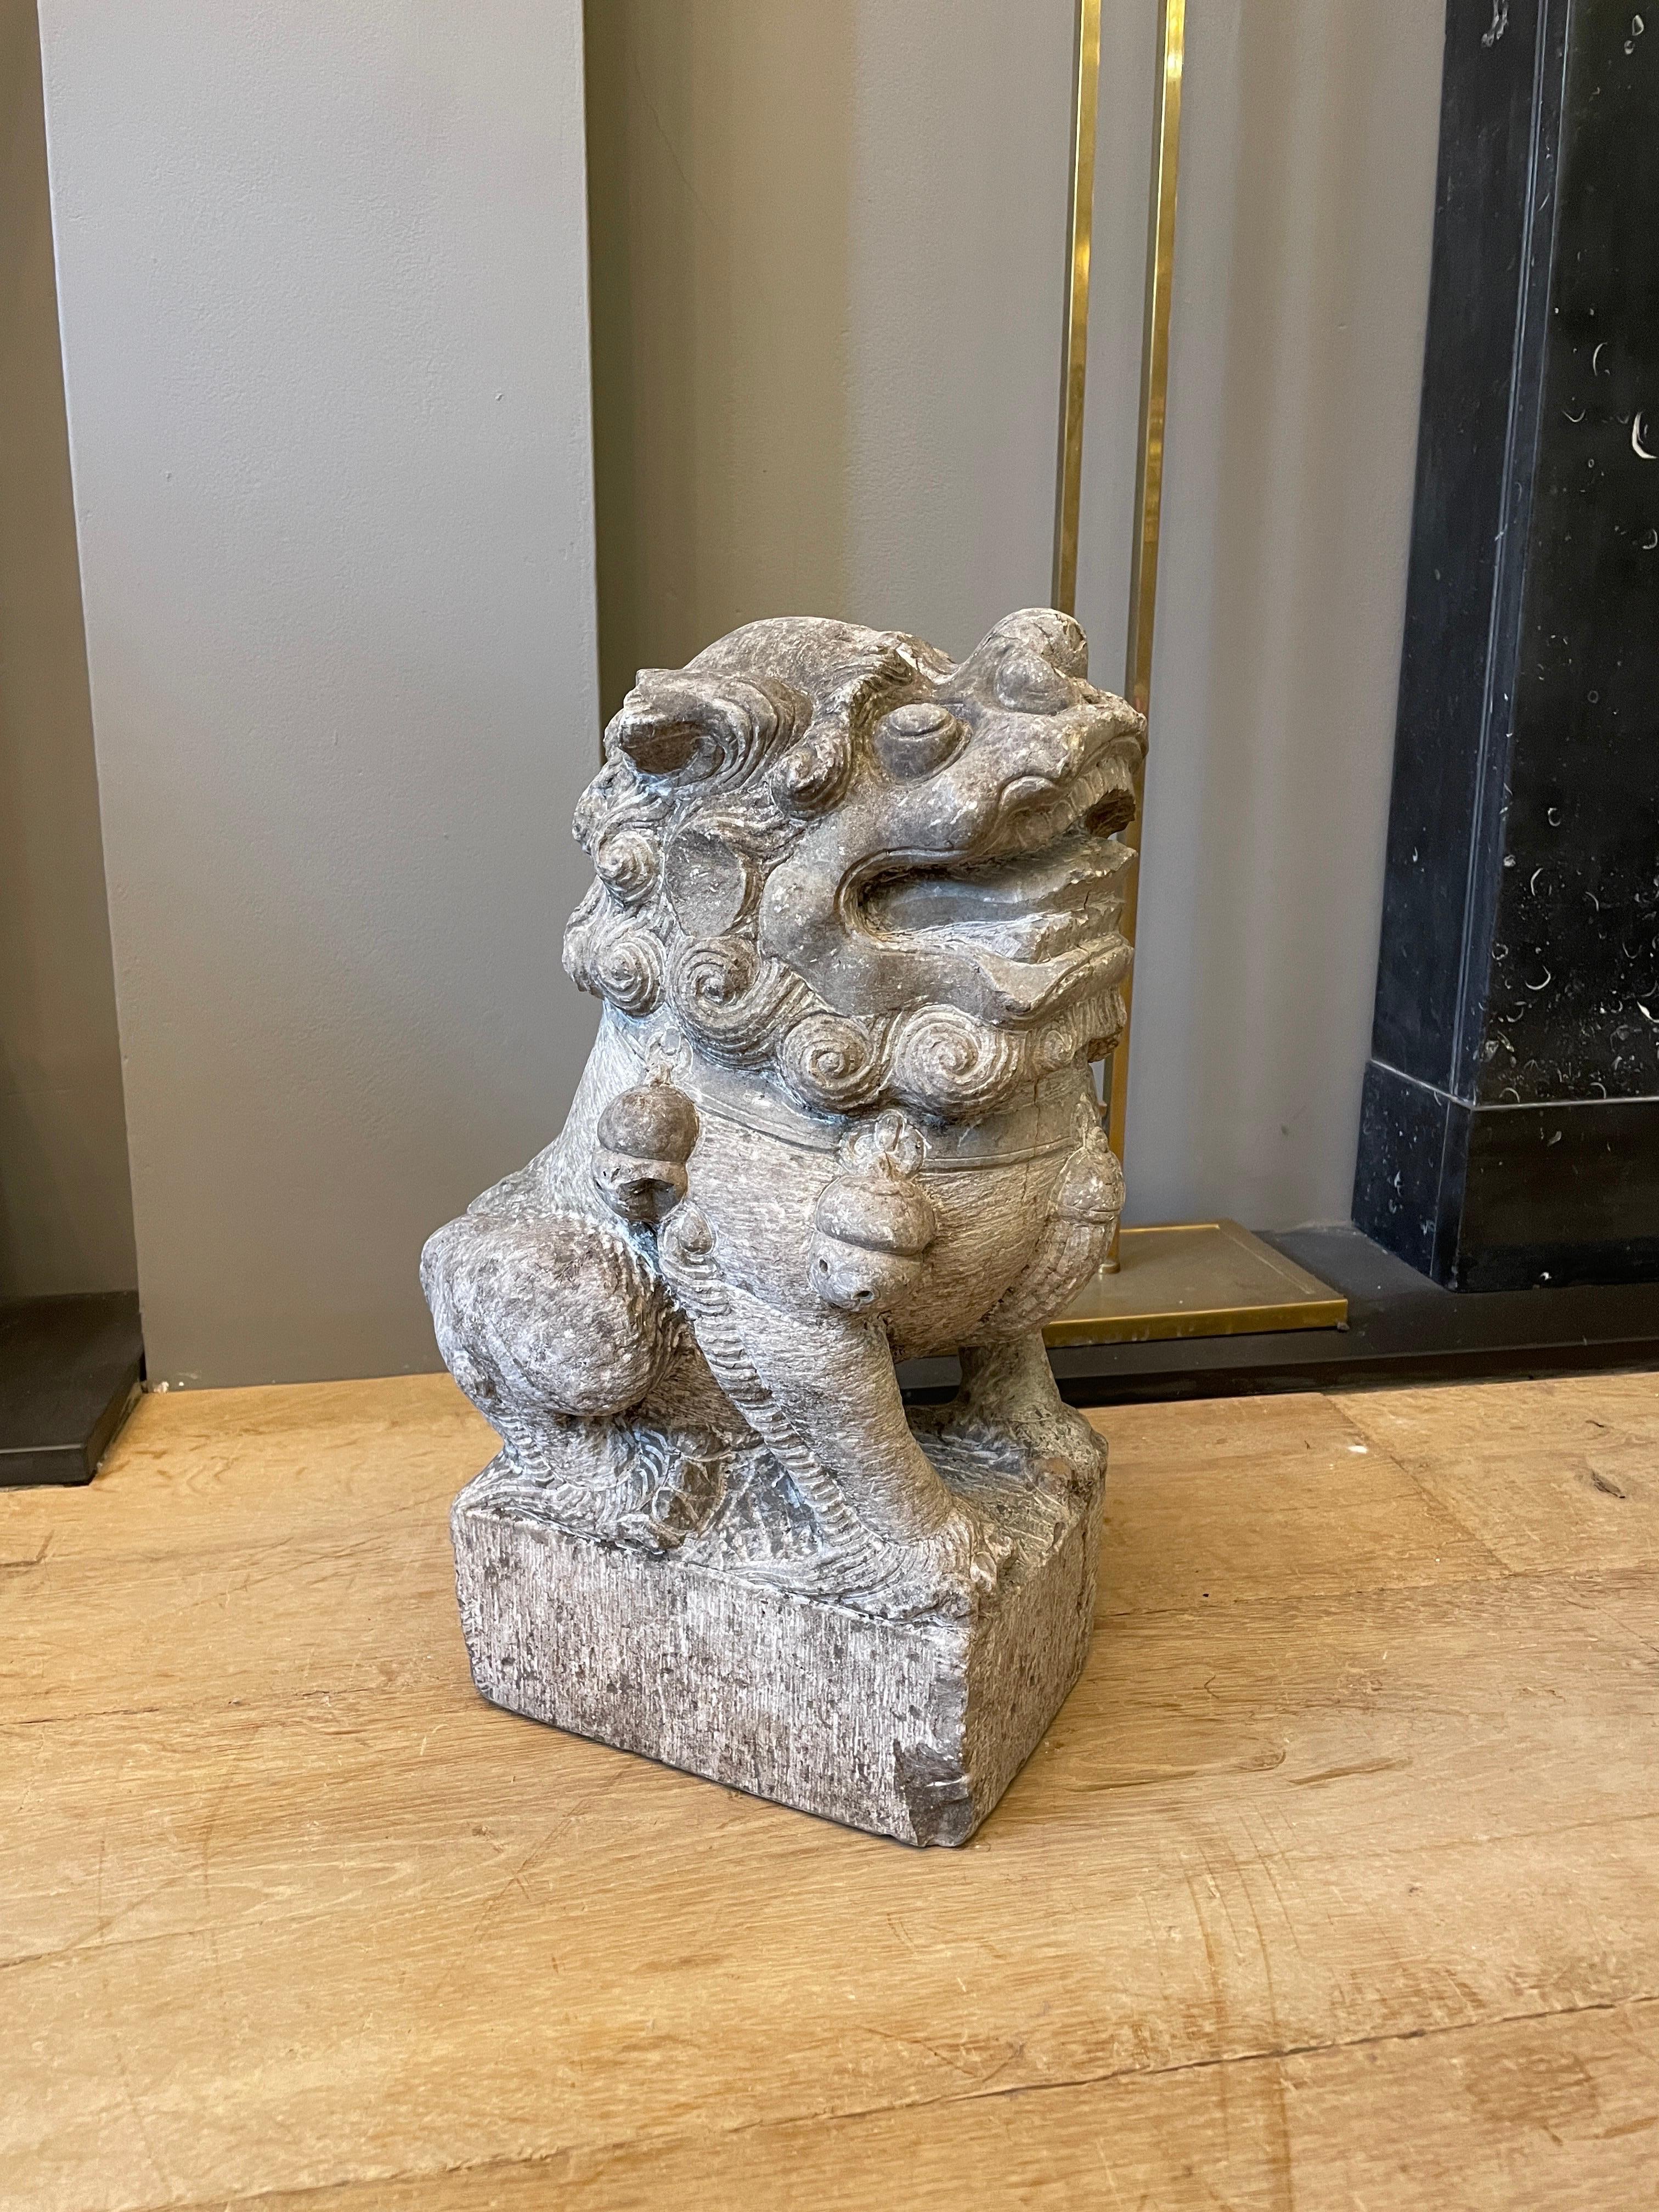 A well carved Foo dog in a hard limestone. Nicely weathered dating it mid 20th century. 
Chinese guardian lions, or imperial guardian lions, are a traditional Chinese architectural ornament, but the origins lie deep in much older Indian Buddhist